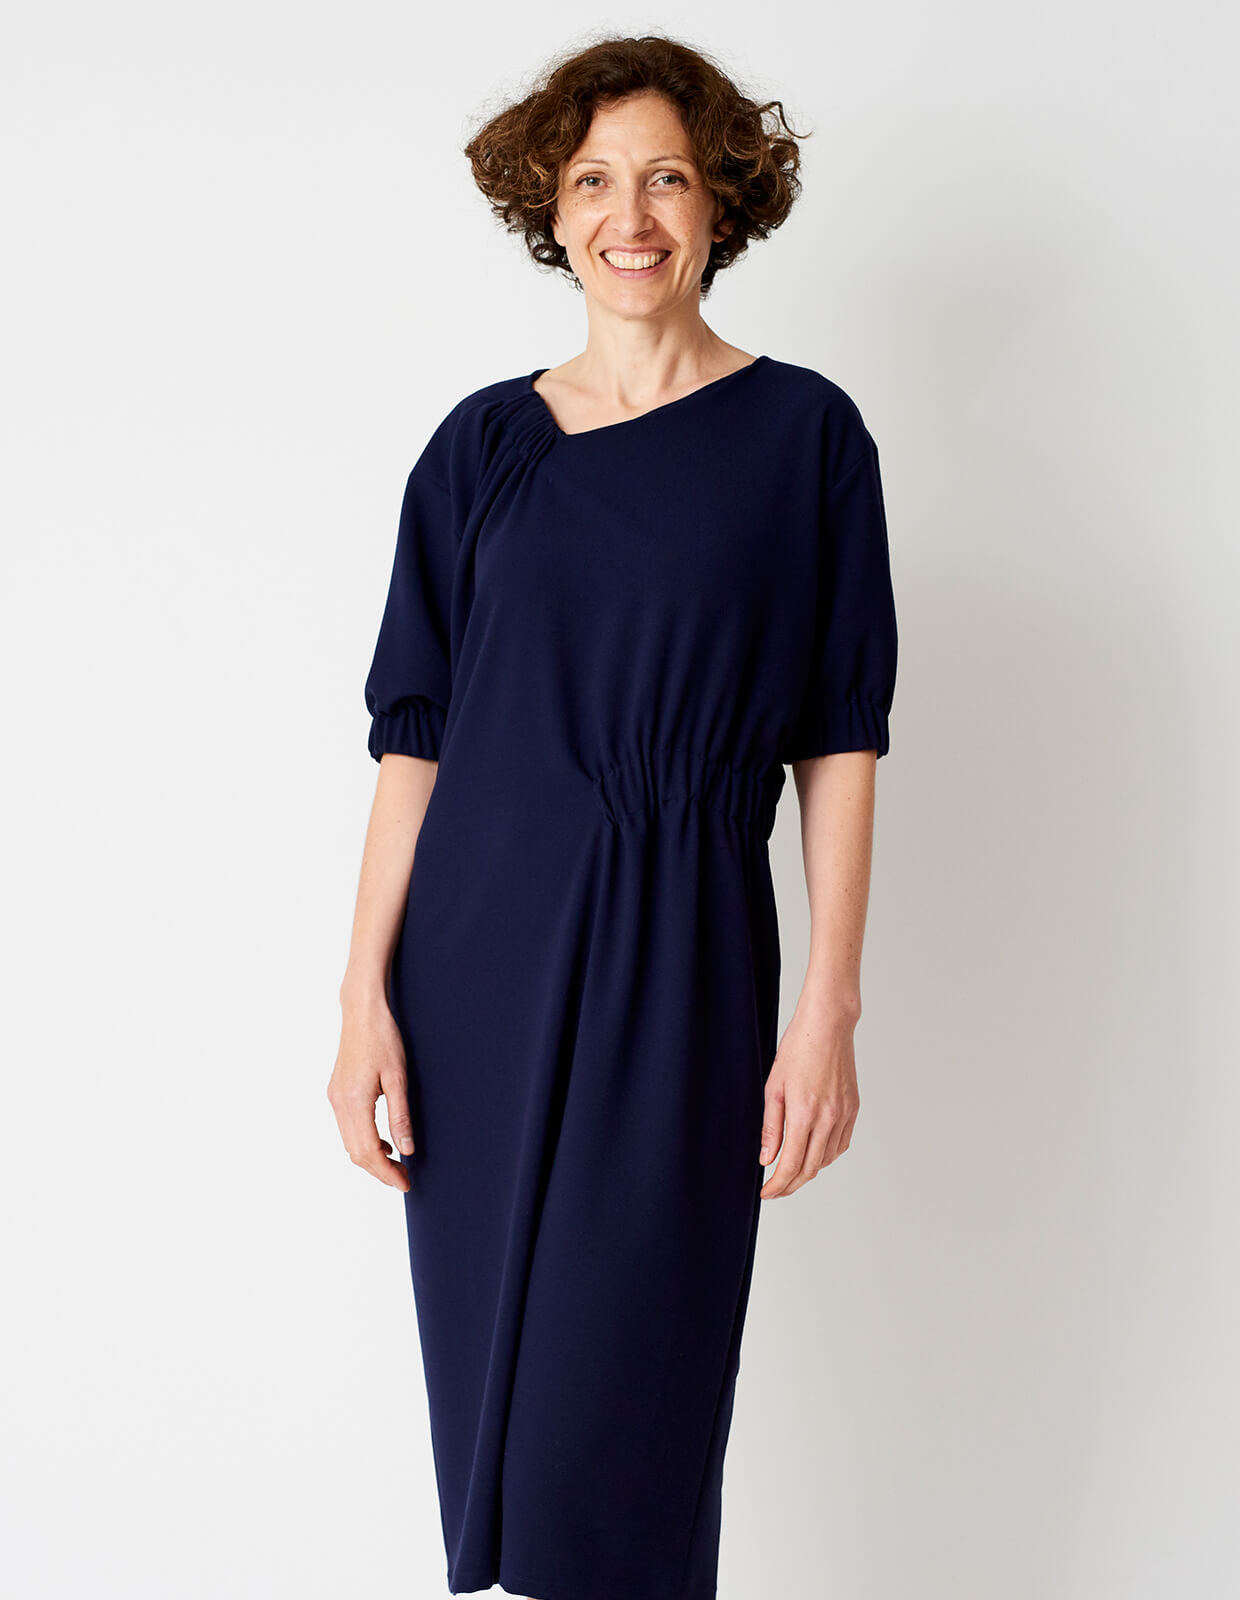 Woman wearing the Asymmetric Gather Dress sewing pattern from The Maker's Atelier on The Fold Line. A dress pattern made in wool or poly/viscose mixes, wool or silk crepes, and silk satins fabrics, featuring an off-center V-neck, relaxed fit, elbow length